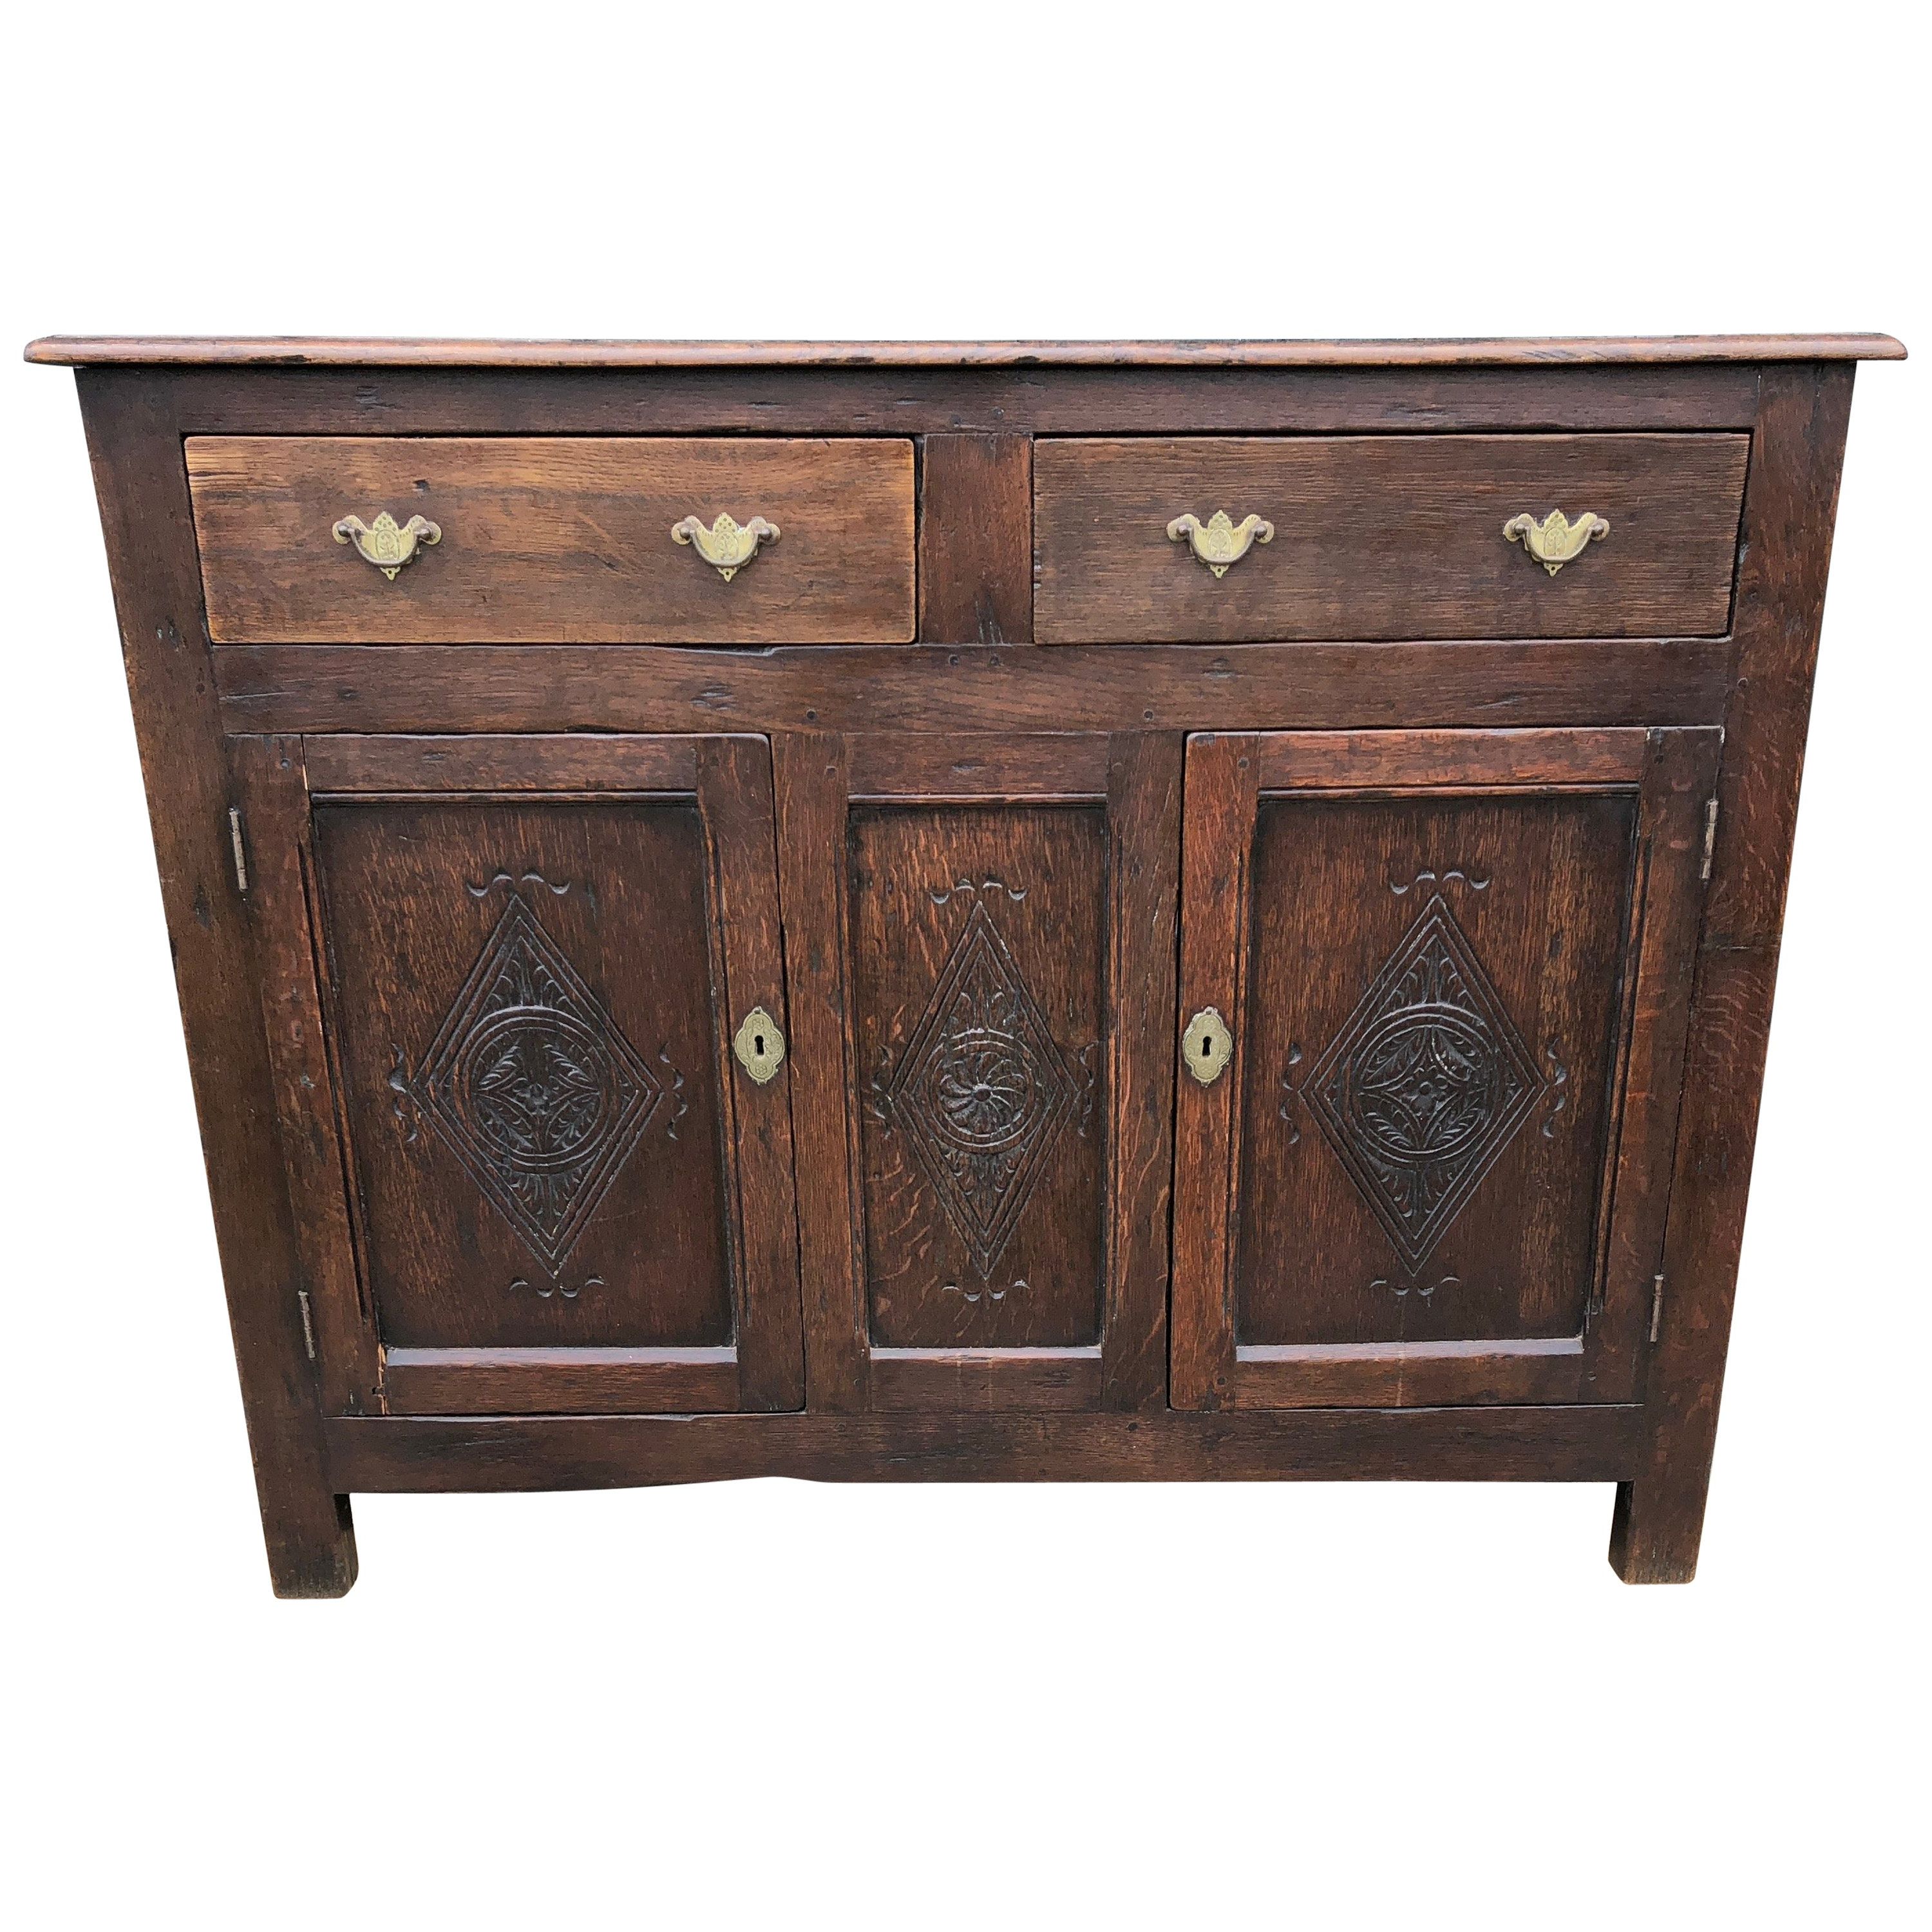 Widely Used Dark Smoked Oak With White Marble Top Sideboards Regarding Charming Primitive French Dark Oak Cabinet Sideboard Buffet For Sale (View 19 of 20)